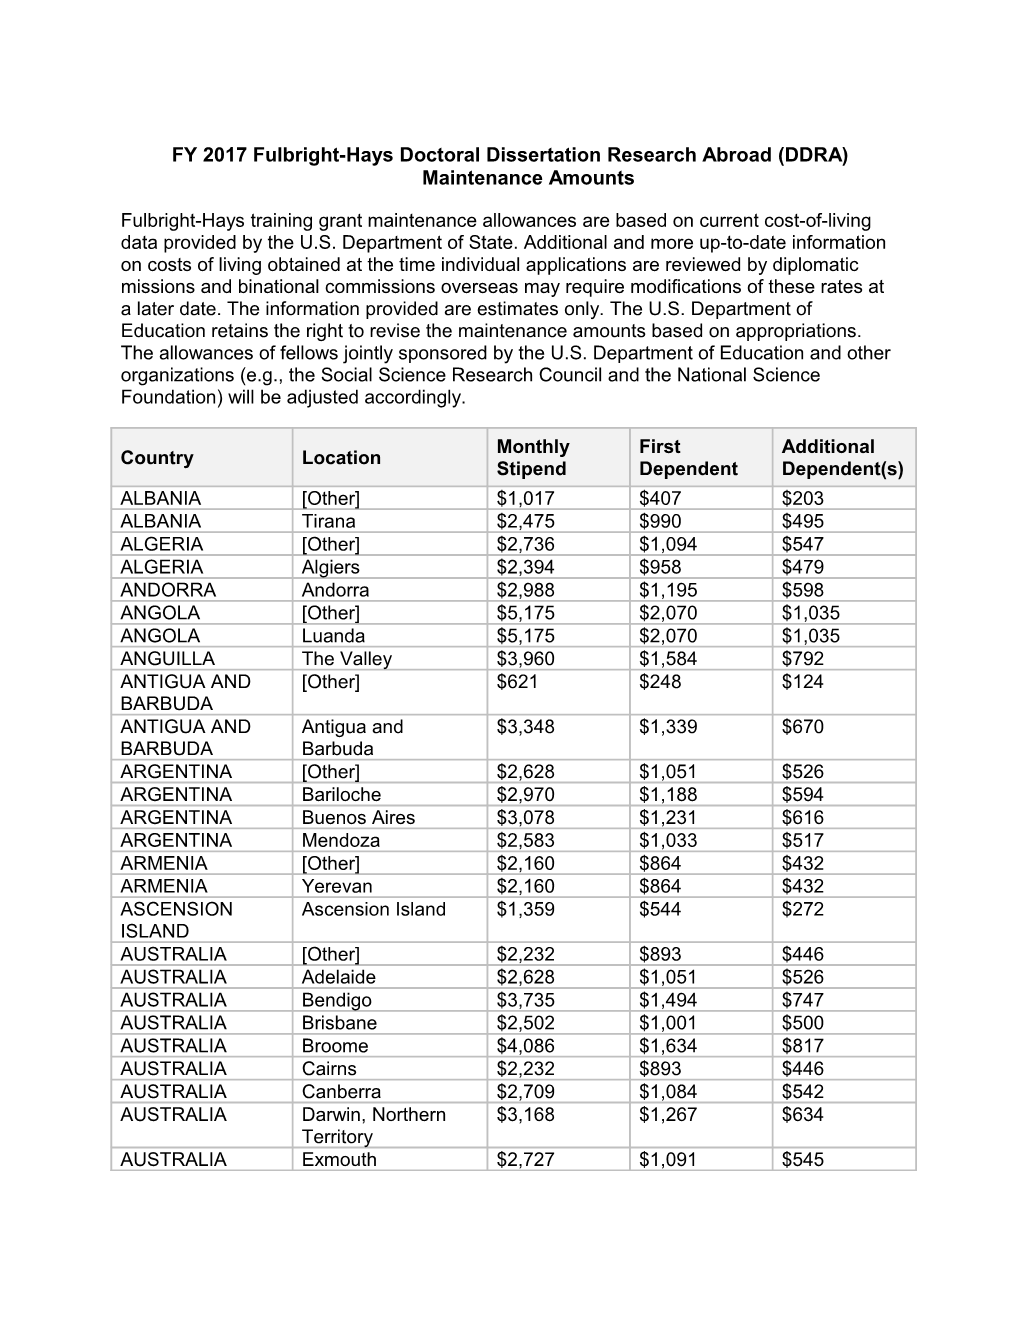 FY 2017 Fulbright-Hays Doctoral Dissertation Research Abroad (DDRA) Maintenance Amounts